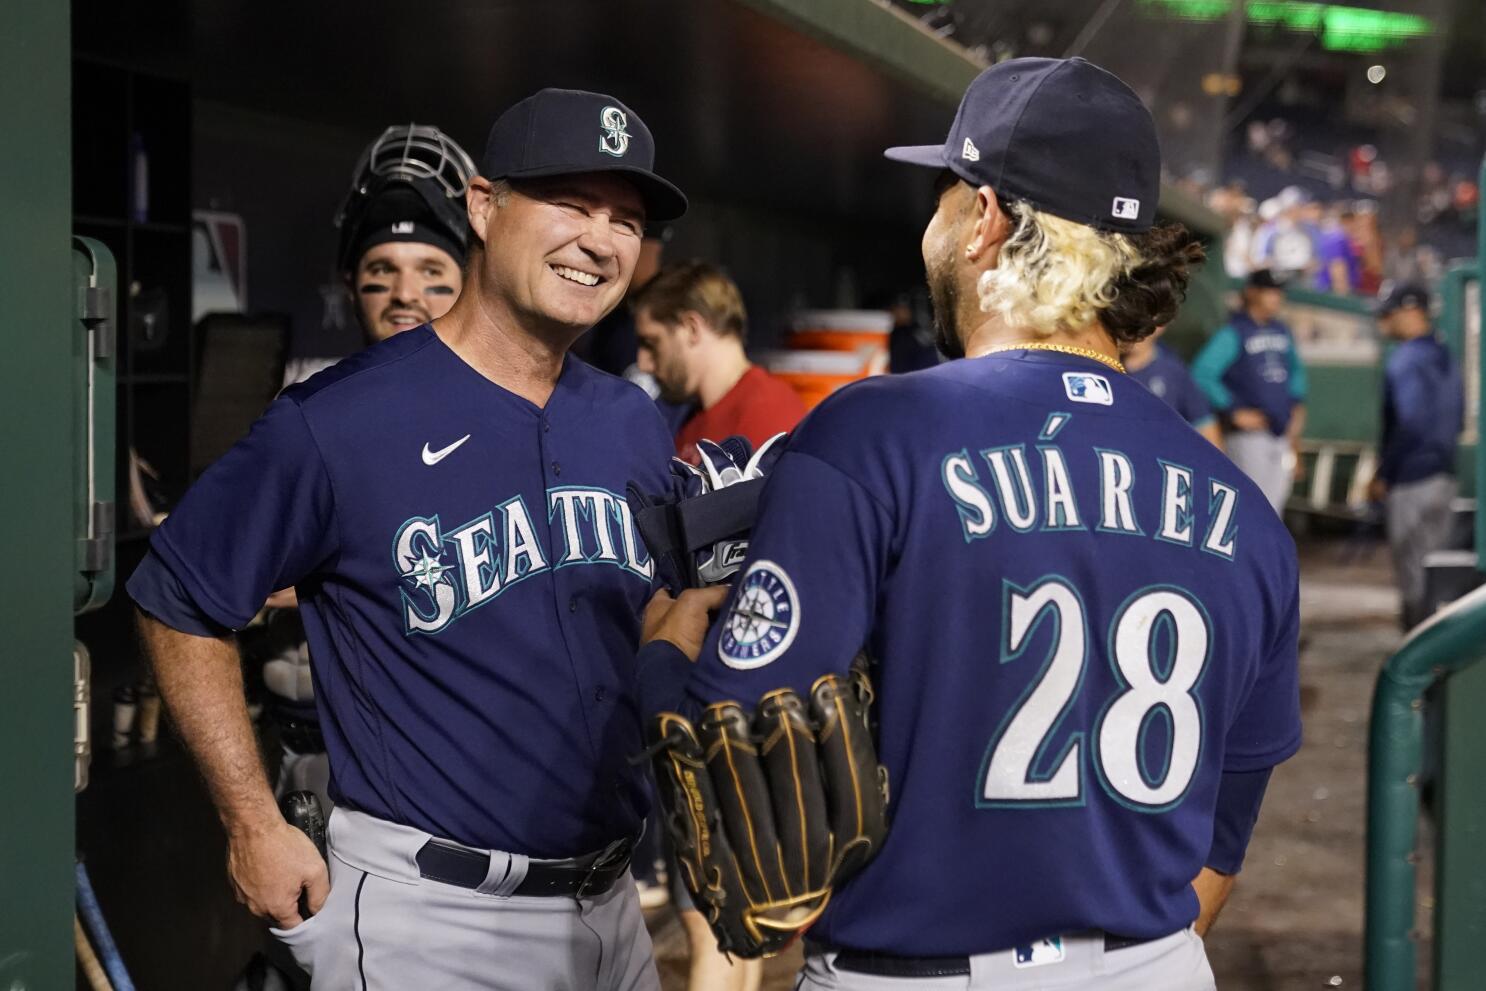 Mariners win 7th straight at home with 7-6 win over Brewers